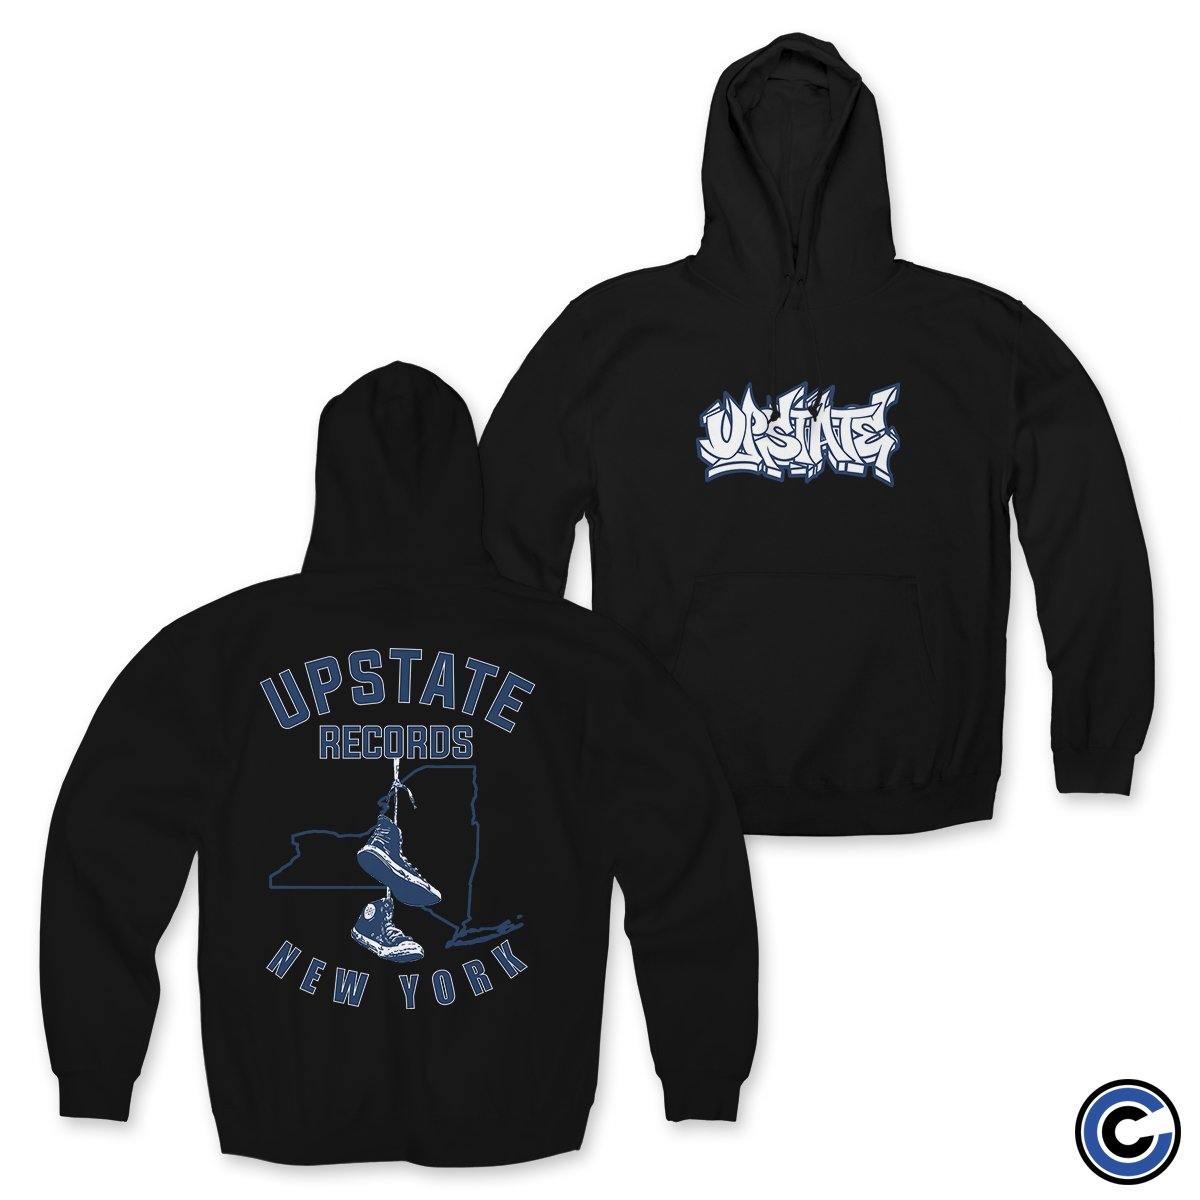 Buy – Upstate Records "Sneaker" Hoodie – Band & Music Merch – Cold Cuts Merch